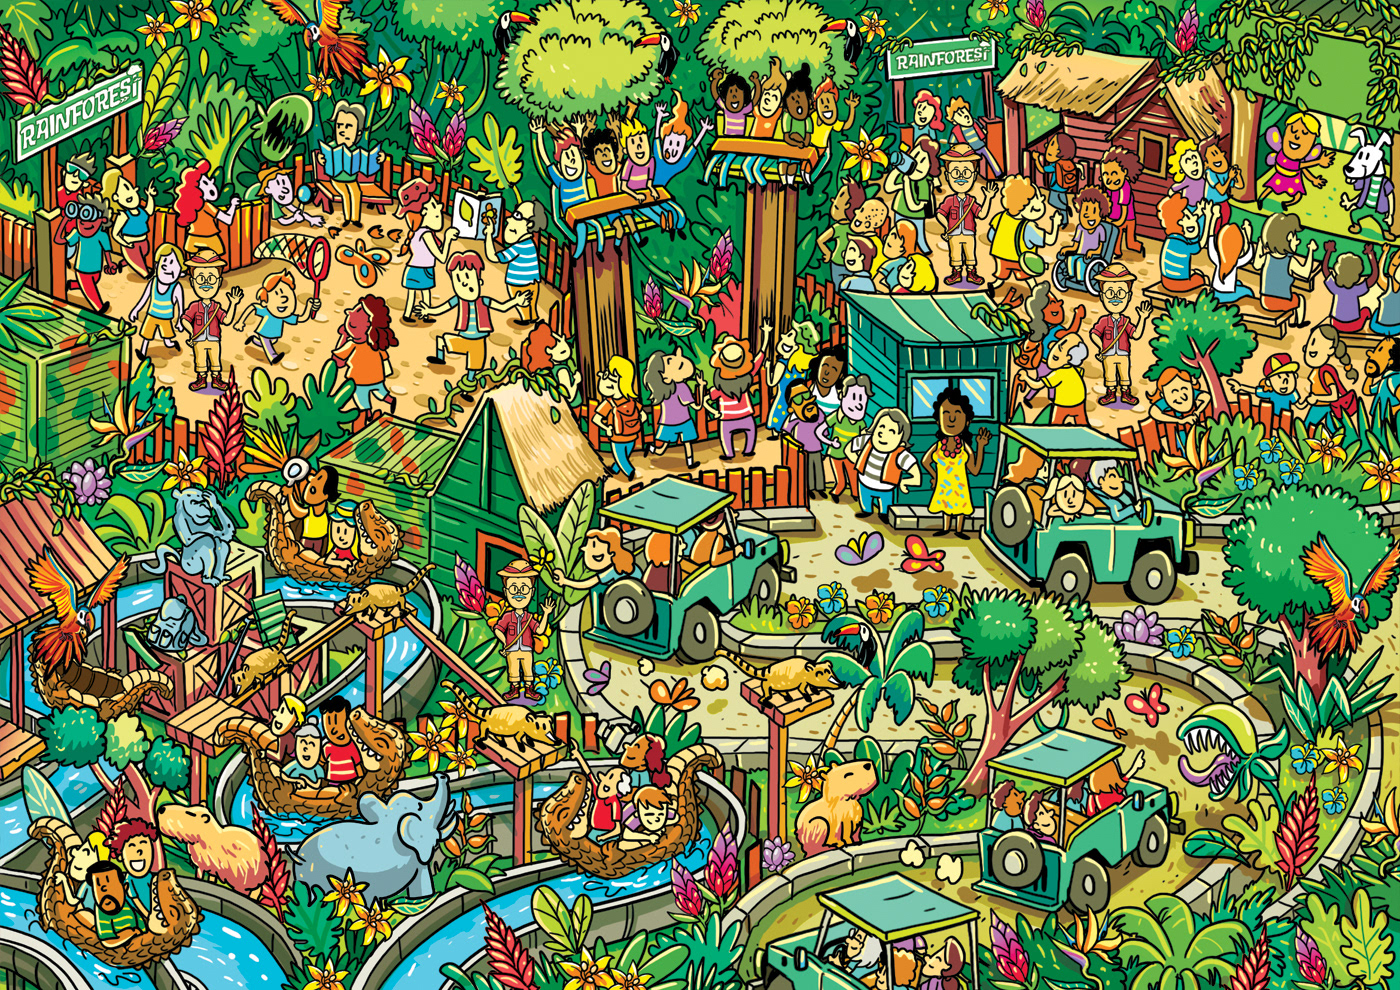 amusement park crowd egypt forest medieval search and find seek and find Theme Park where is waldo Where Is Wally